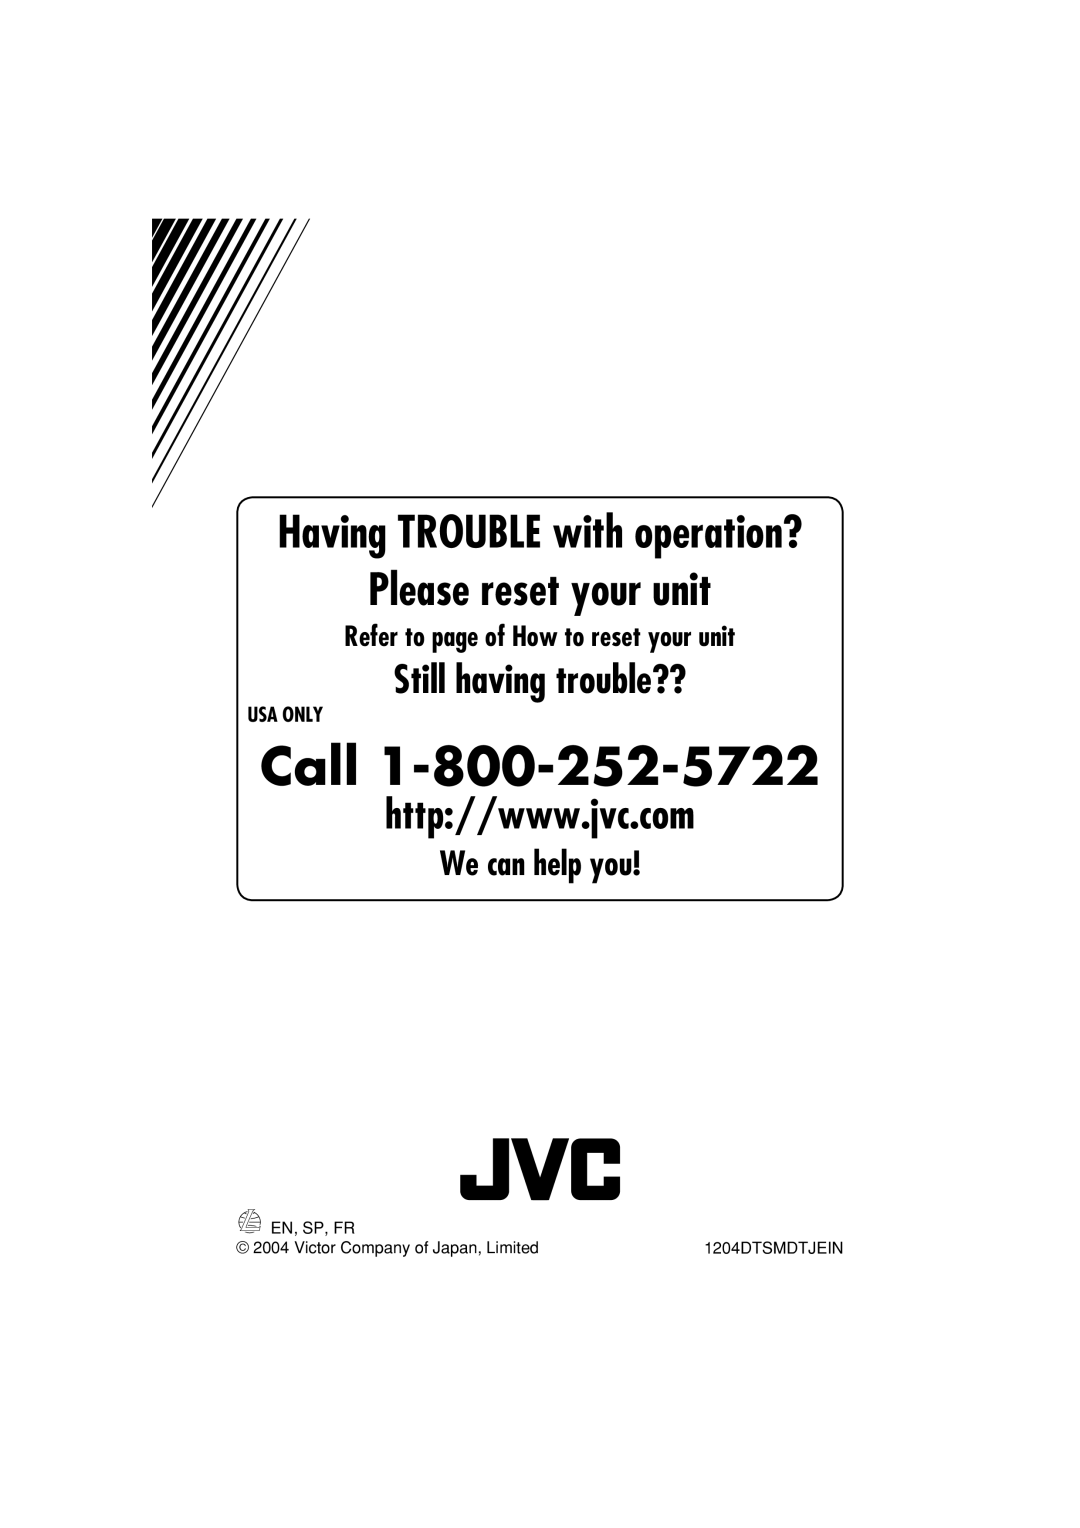 JVC KD-LHX550, KD-AR5500 We can help you, Refer to page of How to reset your unit, Usa Only, Call, Please reset your unit 